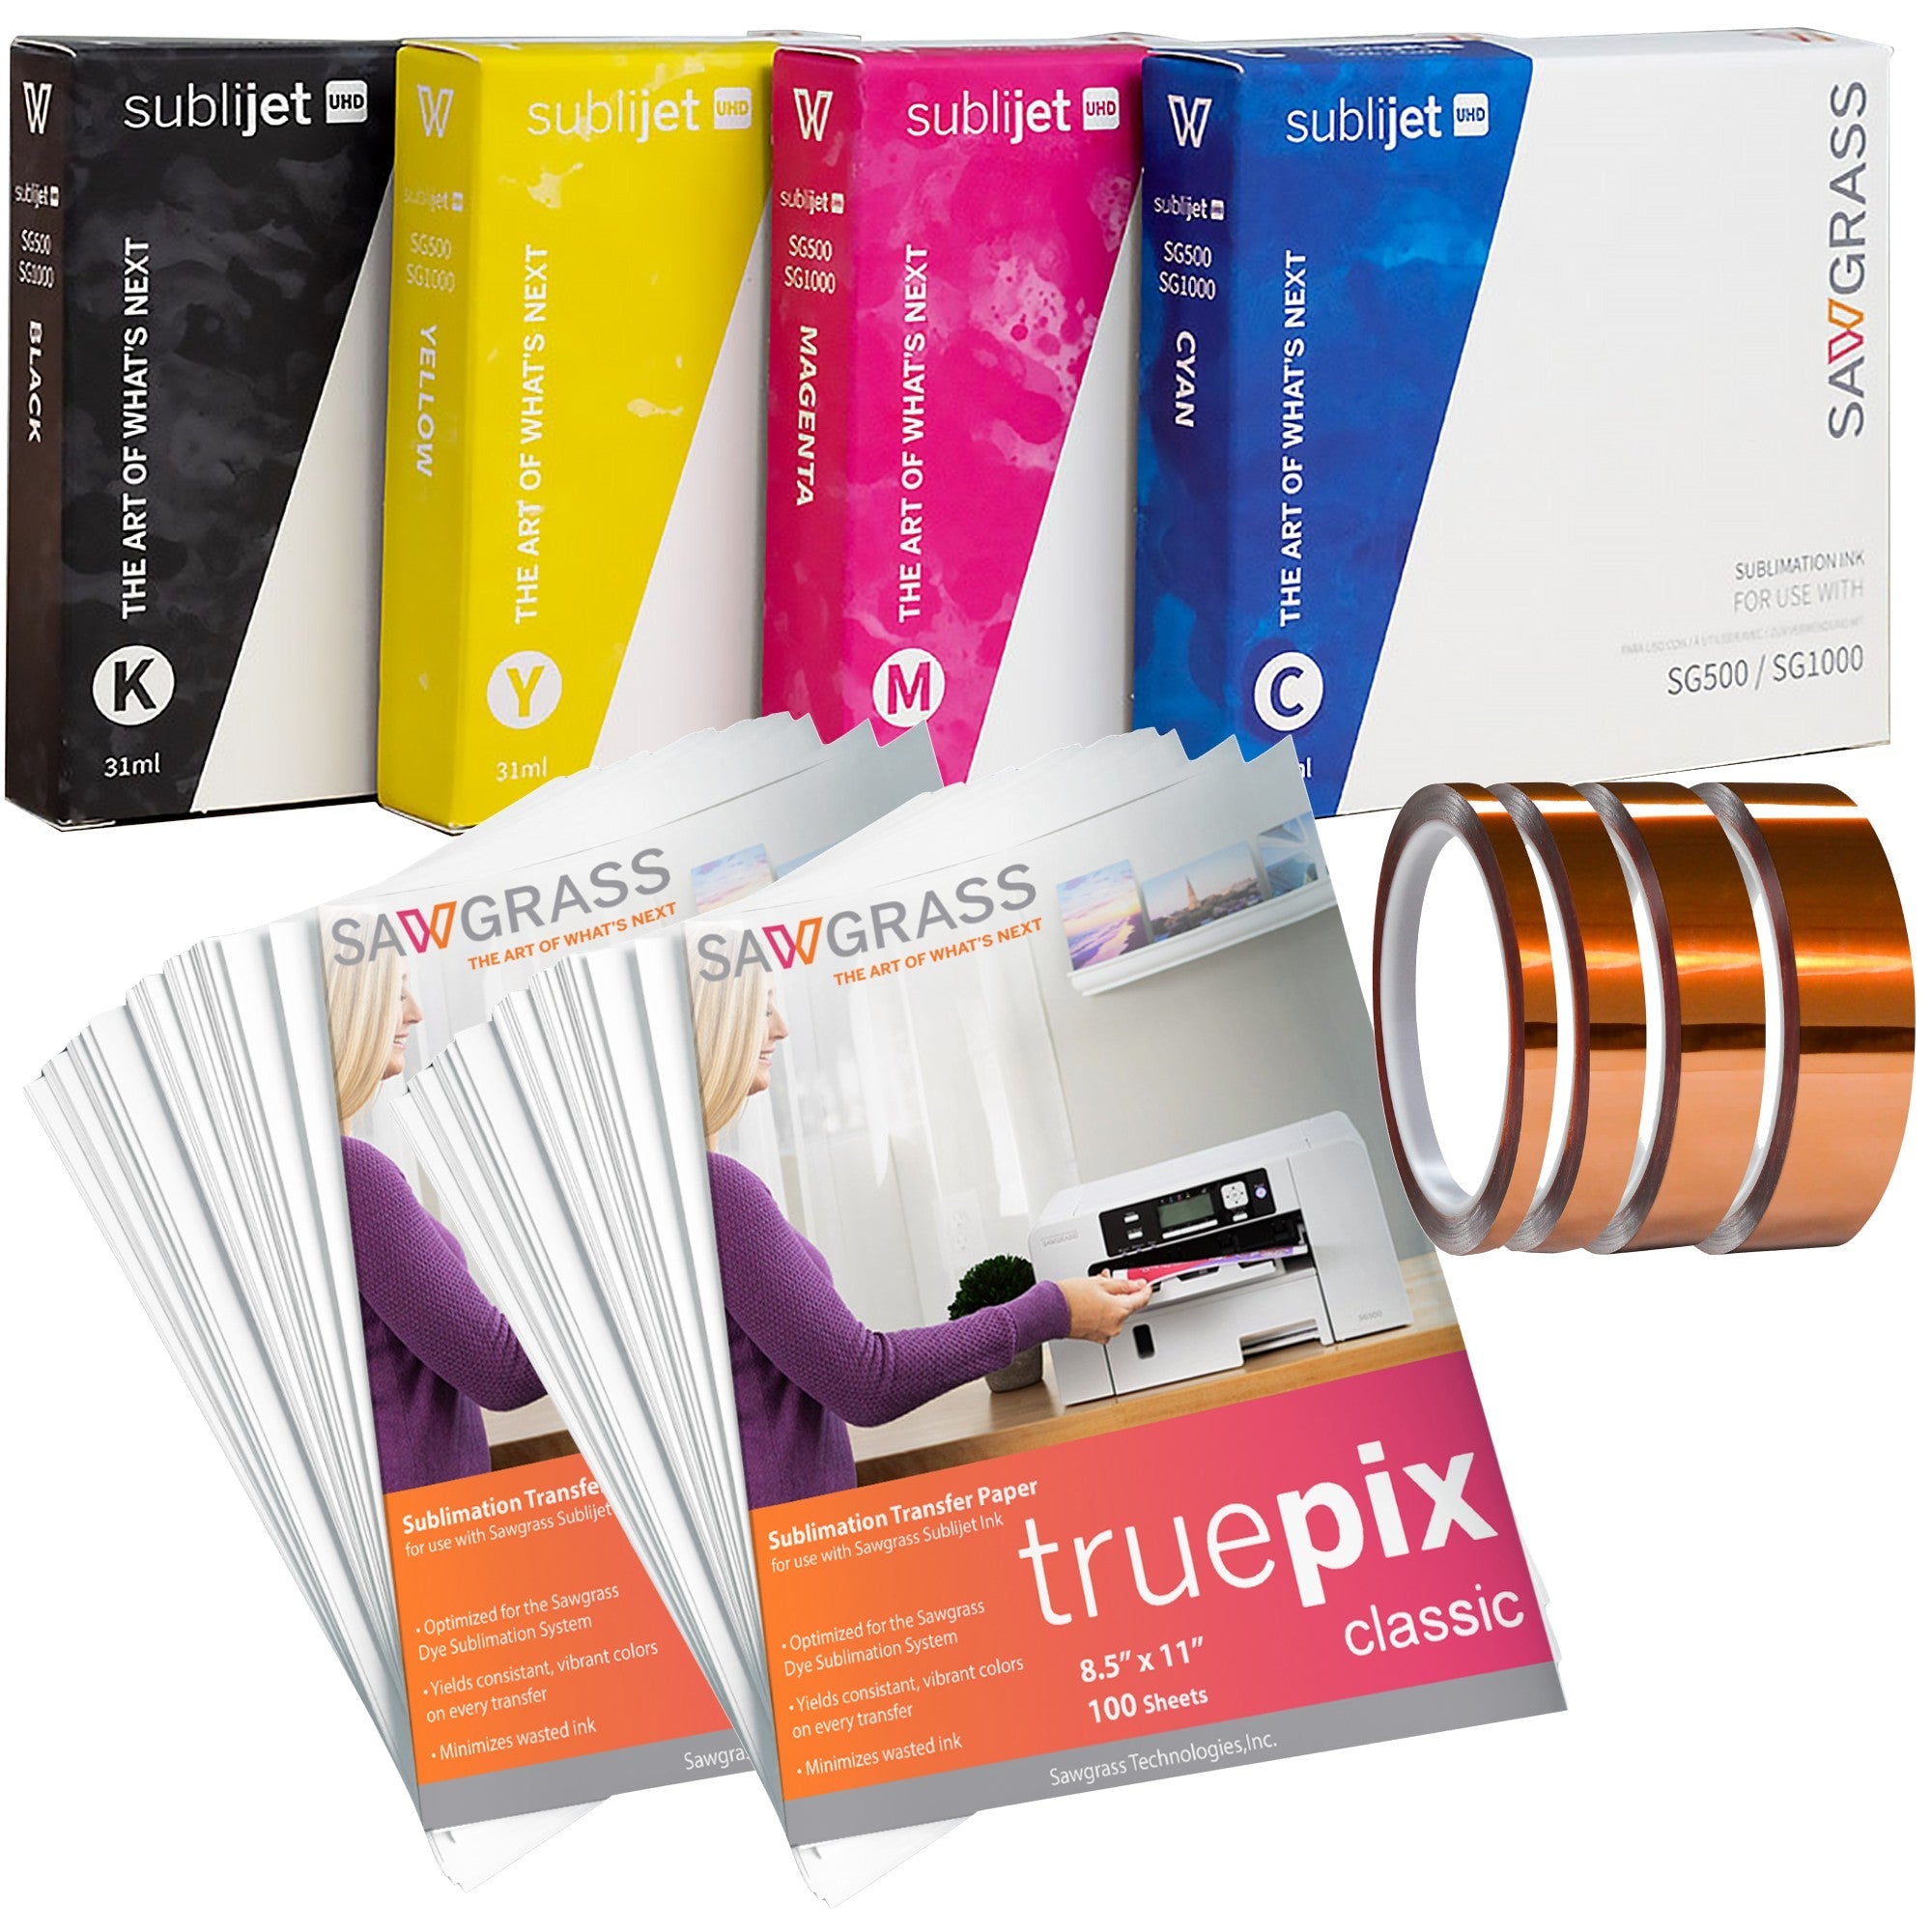 Sawgrass SubliJet UHD Inks SG500 & SG1000 4 Pack, 200 Sheets of Paper & Tape